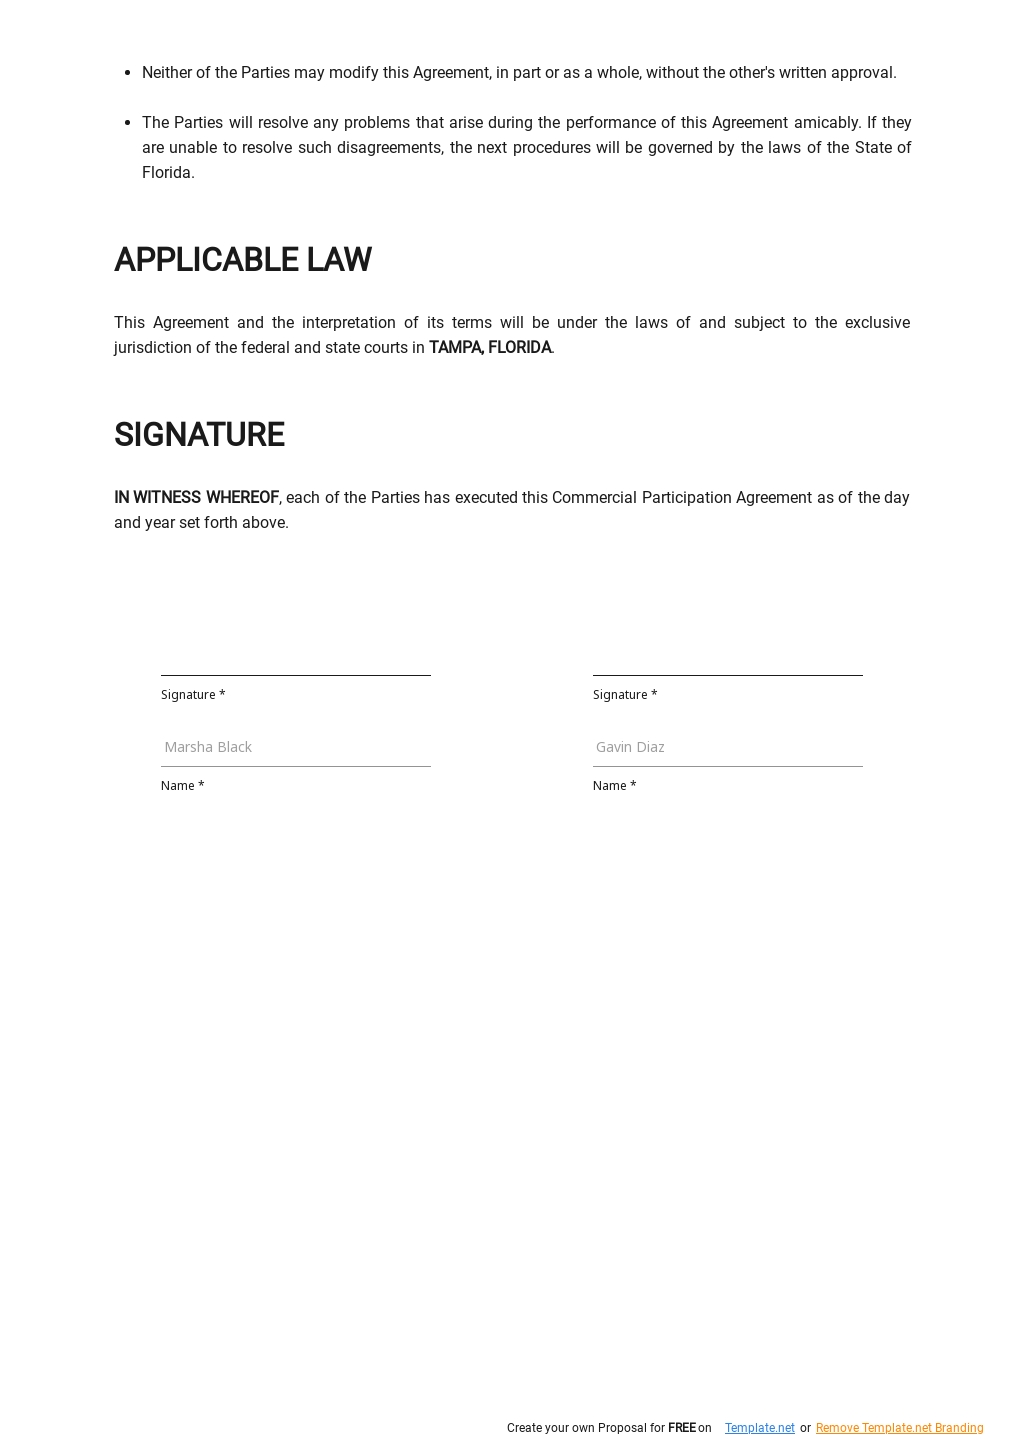 Commercial Participation Agreement Template 2.jpe